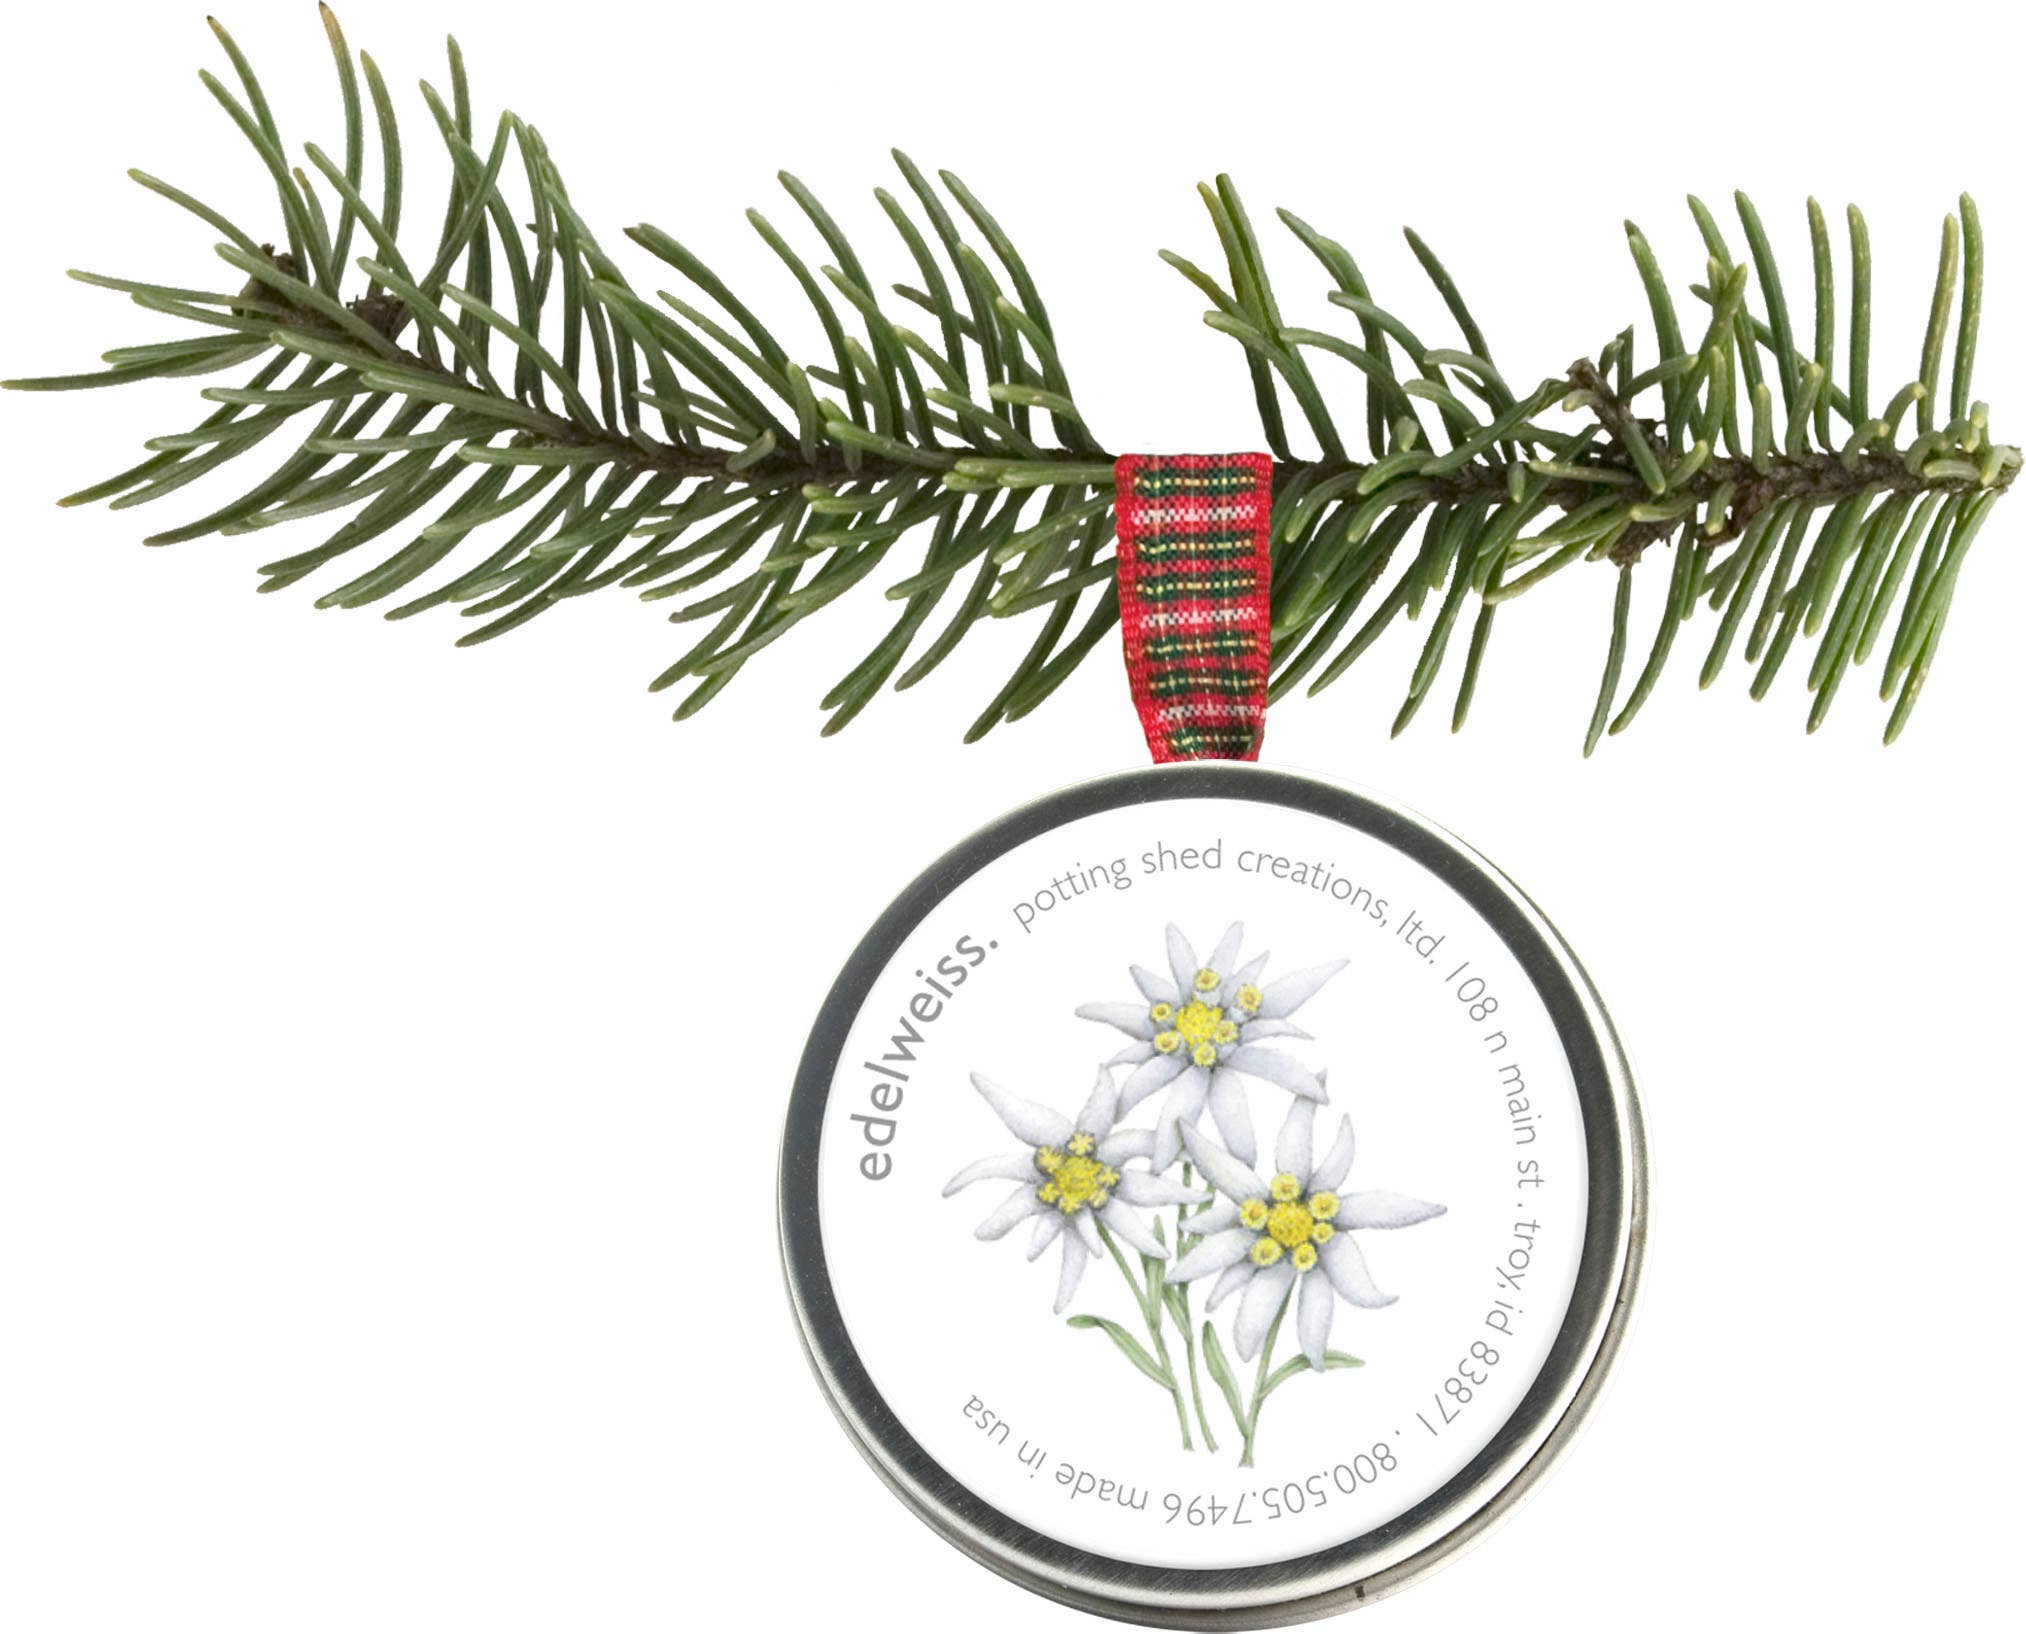 Edelweiss Garden Sprinkles Holiday Ornament - Clearance